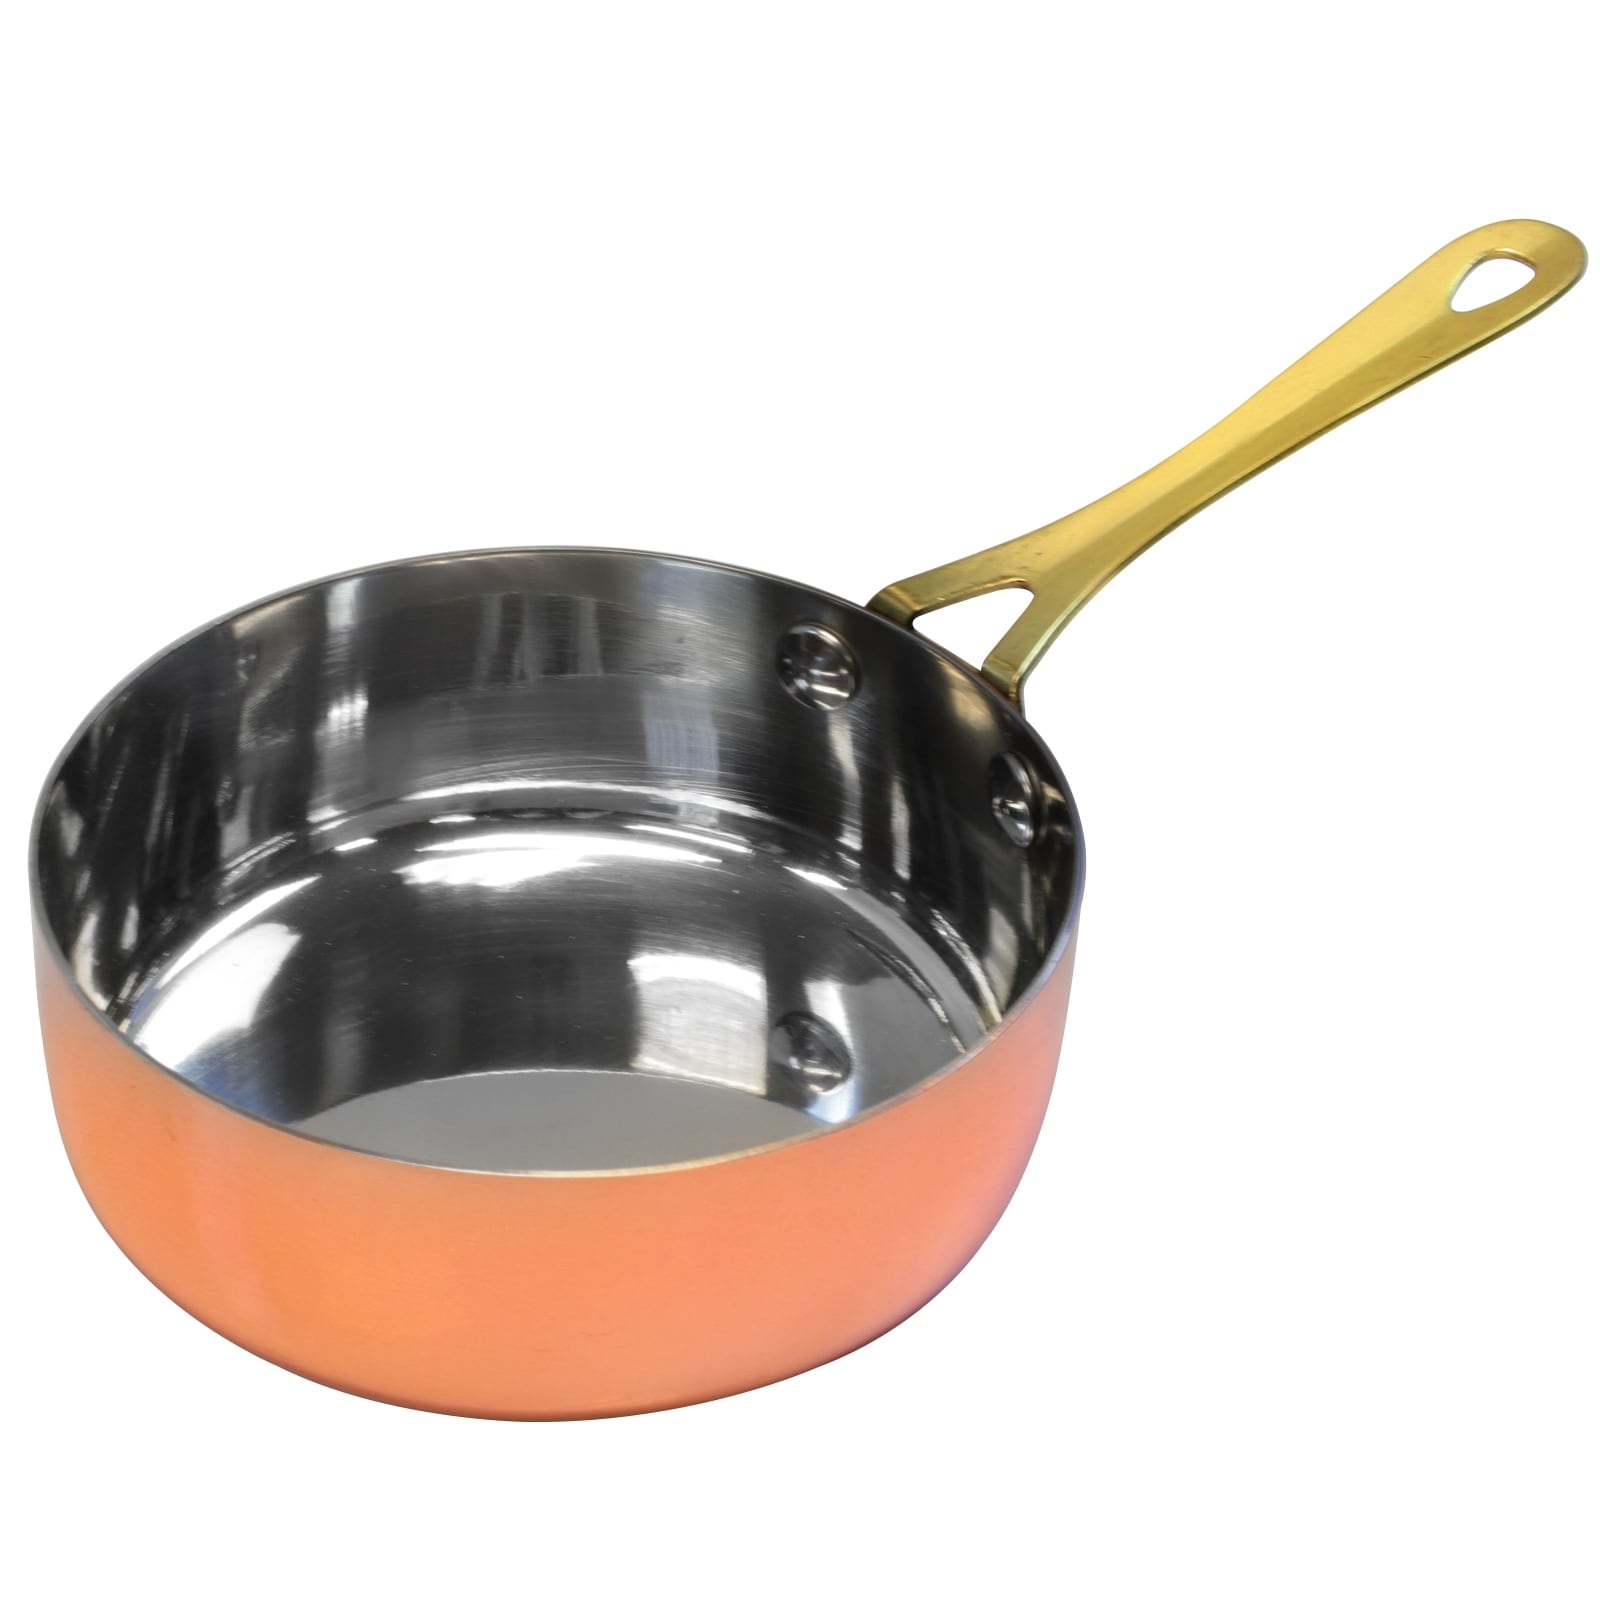 https://ak1.ostkcdn.com/images/products/is/images/direct/2020c4a2e70b55143184ef8fd5fd42532d6becbc/Gibson-Home-Rembrandt-4.7-Inch-Stainless-Steel-Mini-Frying-Pan%2C-Copper-Plated.jpg